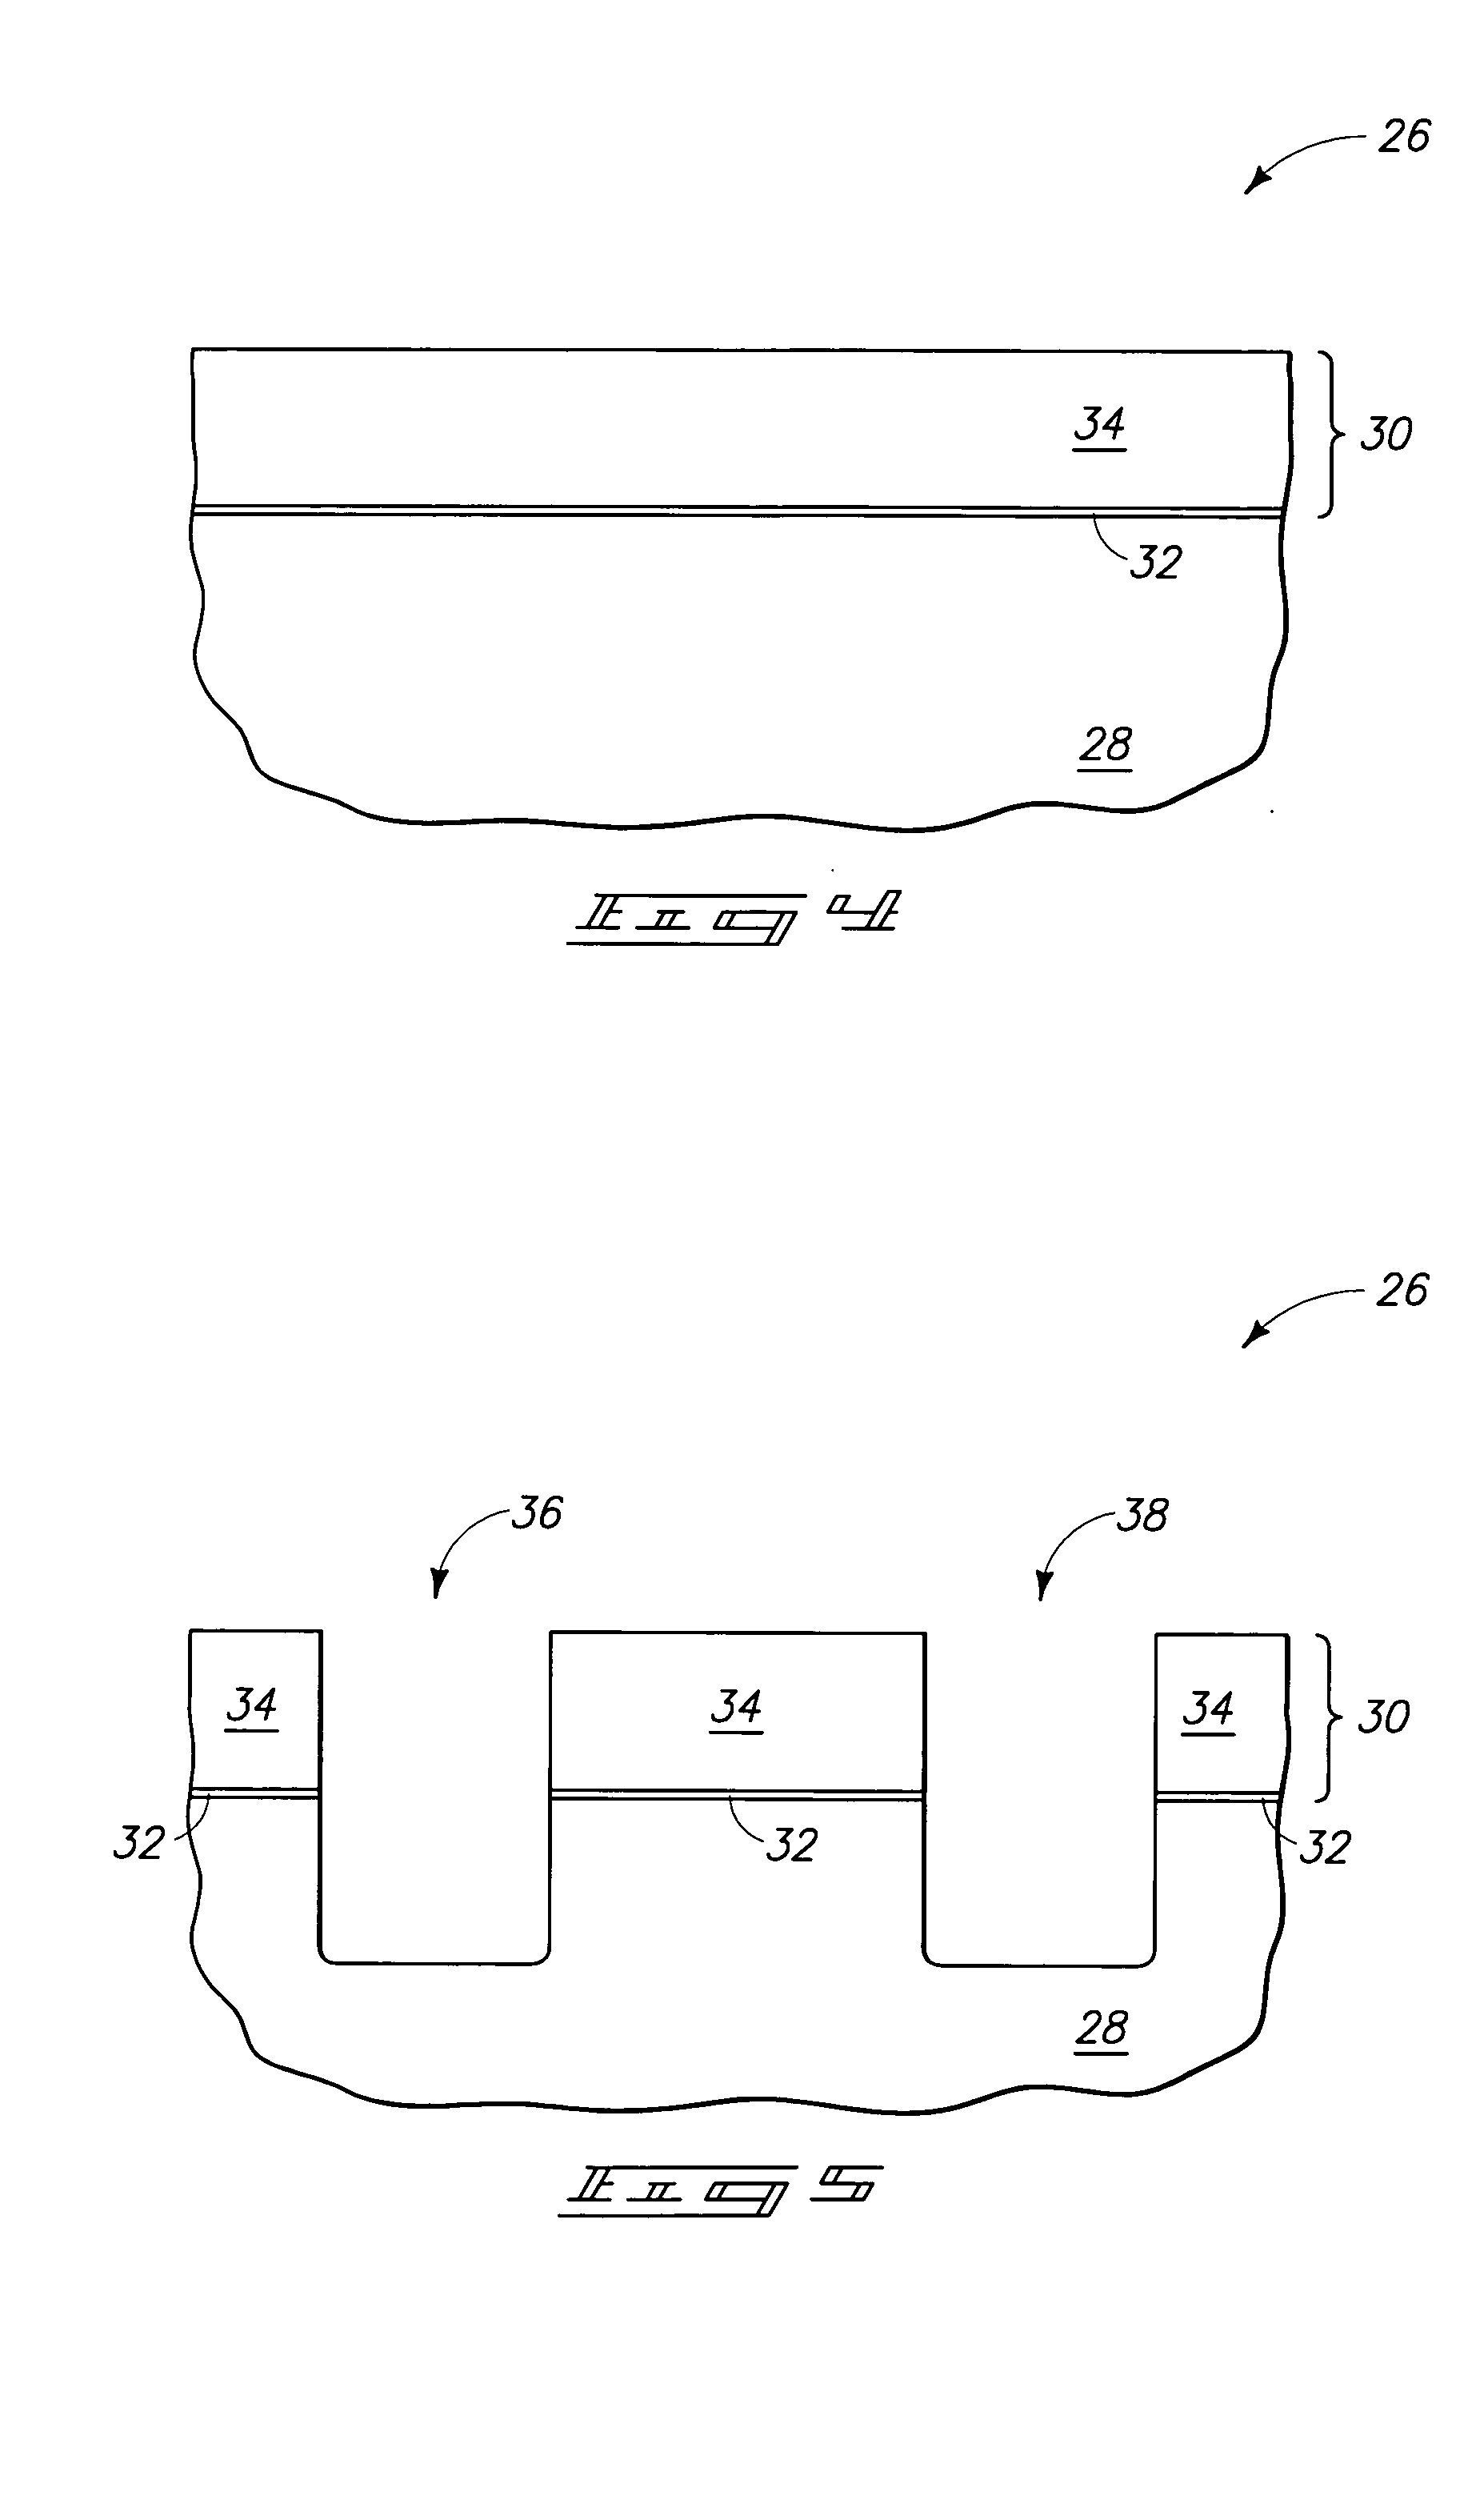 Method of forming trench isolation in the fabrication of integrated circuitry